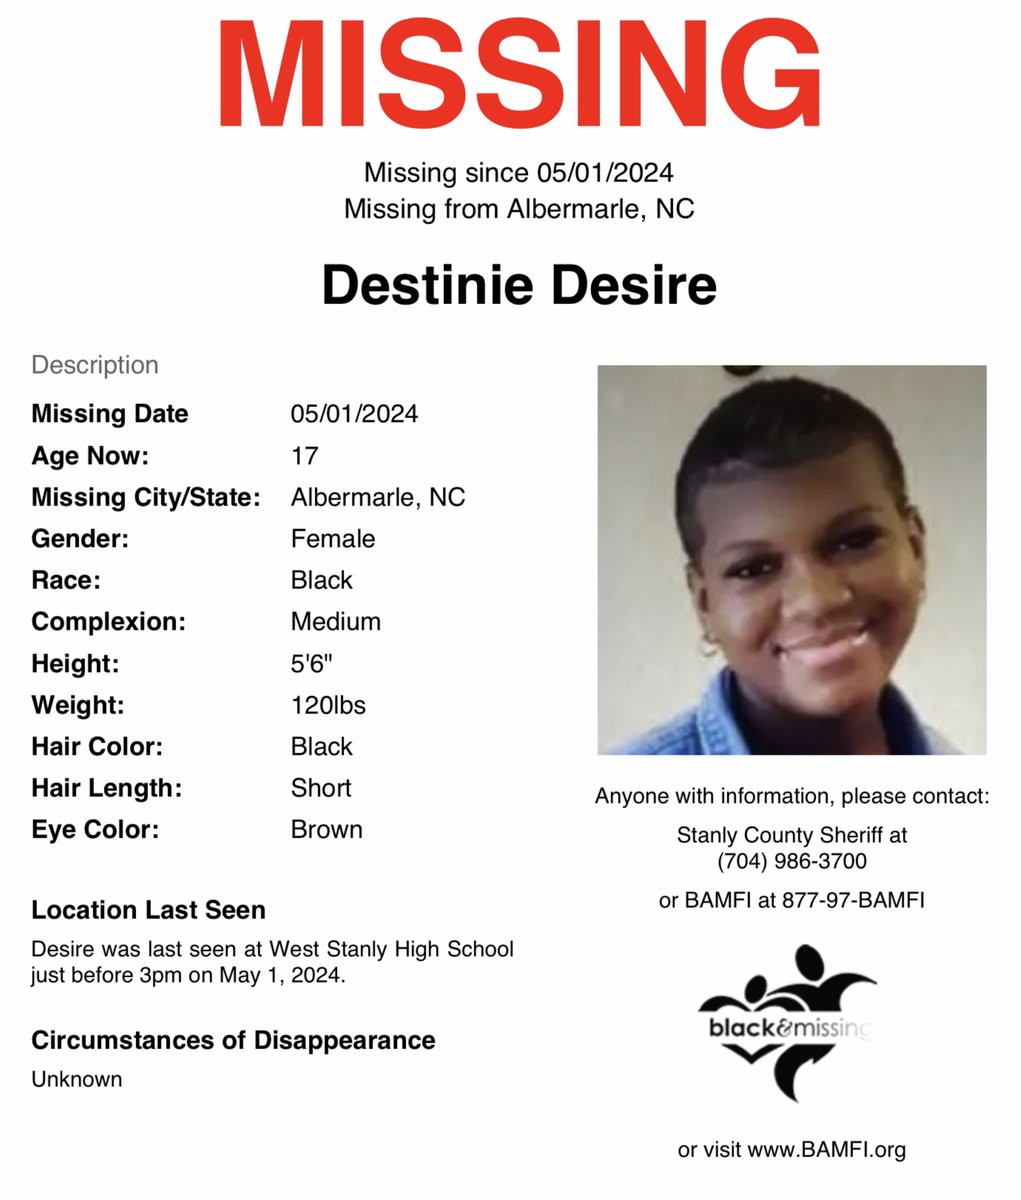 #Albermarle, #NorthCarolina: 17y/o Destinie Desire was last seen at West Stanly High School just before 3pm on May 1. She may be in #Atlanta. “A device associated with Destini Desire, 17, has been tracked to the area of 14th Street NW and Northside Drive NW in Midtown.